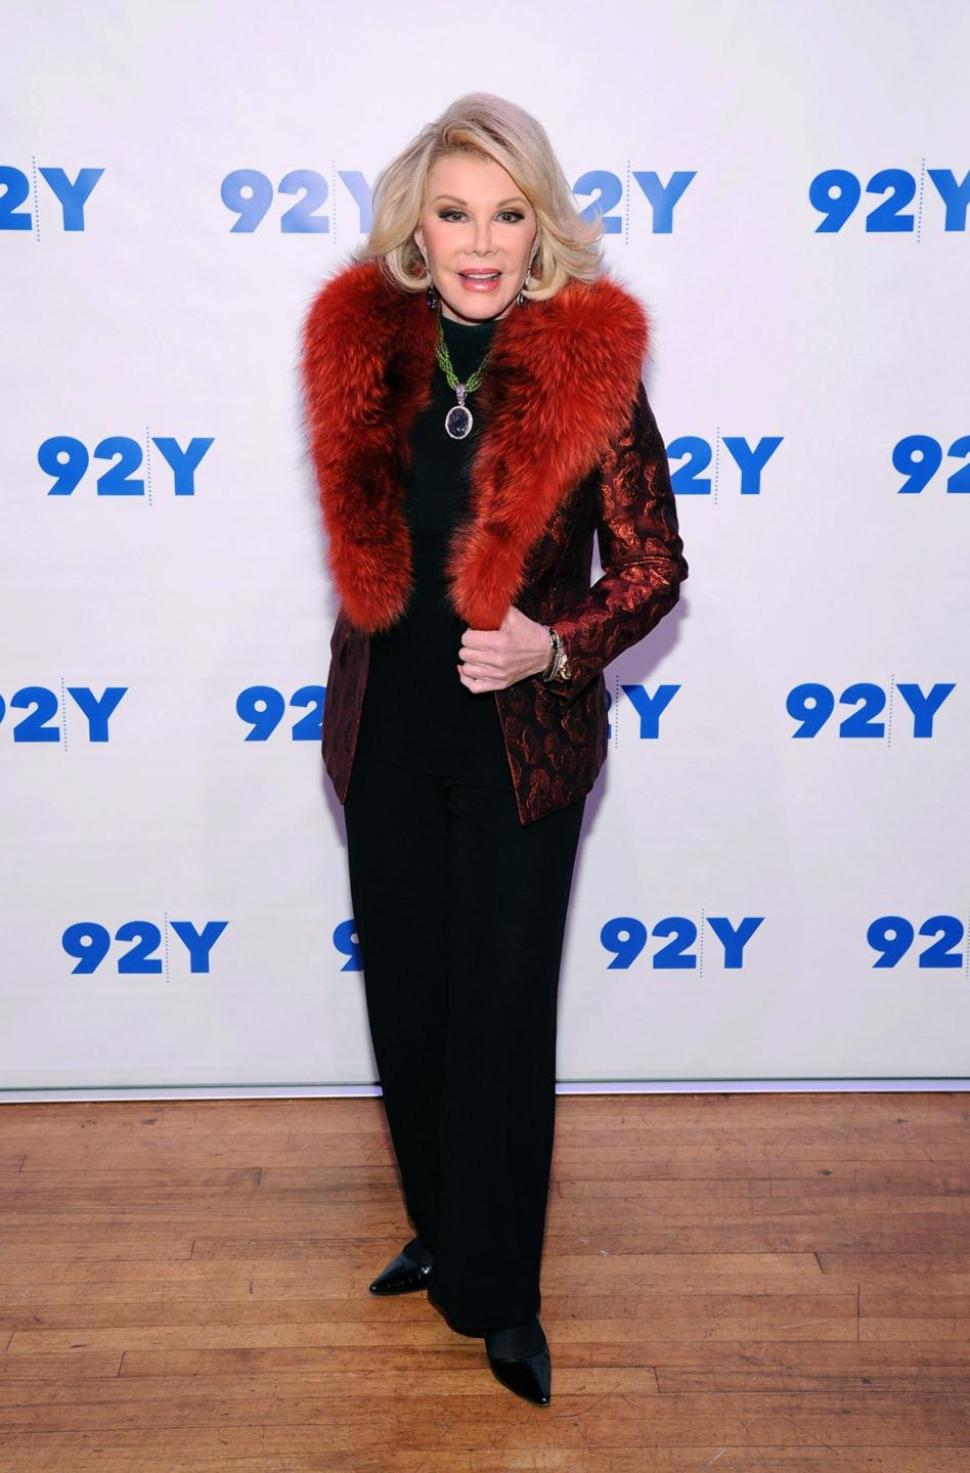 Joan Rivers, pictured at An Evening With Joan And Melissa Rivers on Jan. 22.